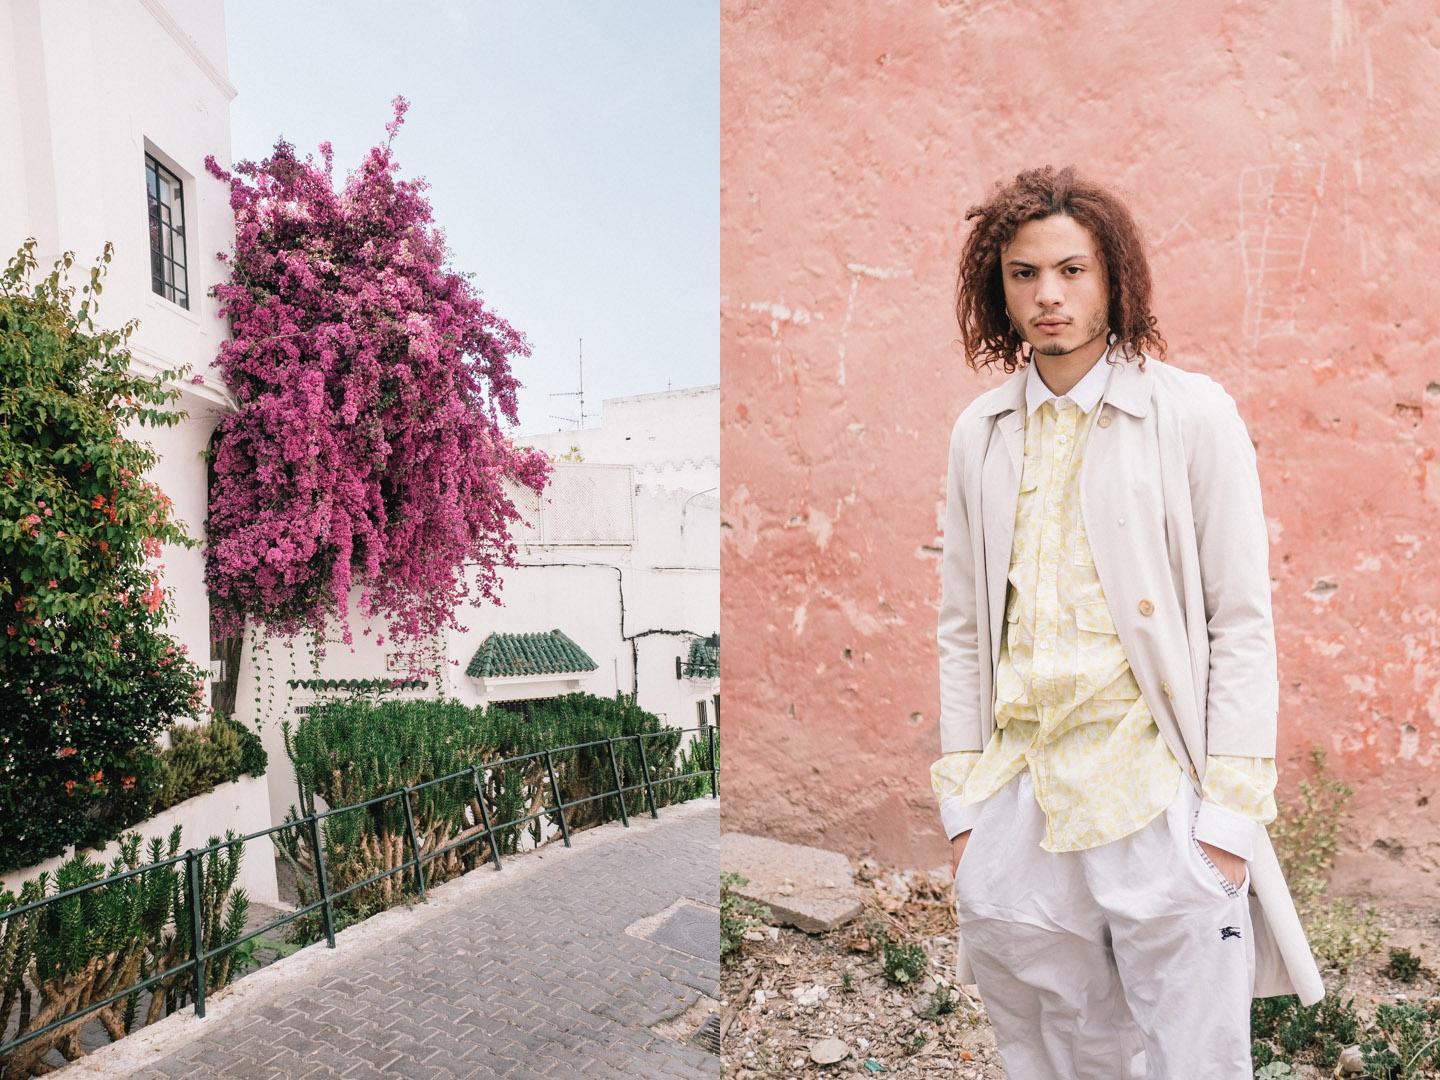 Amine and Kamal are two young artists from Marrakech. Together with other creative friends, they...